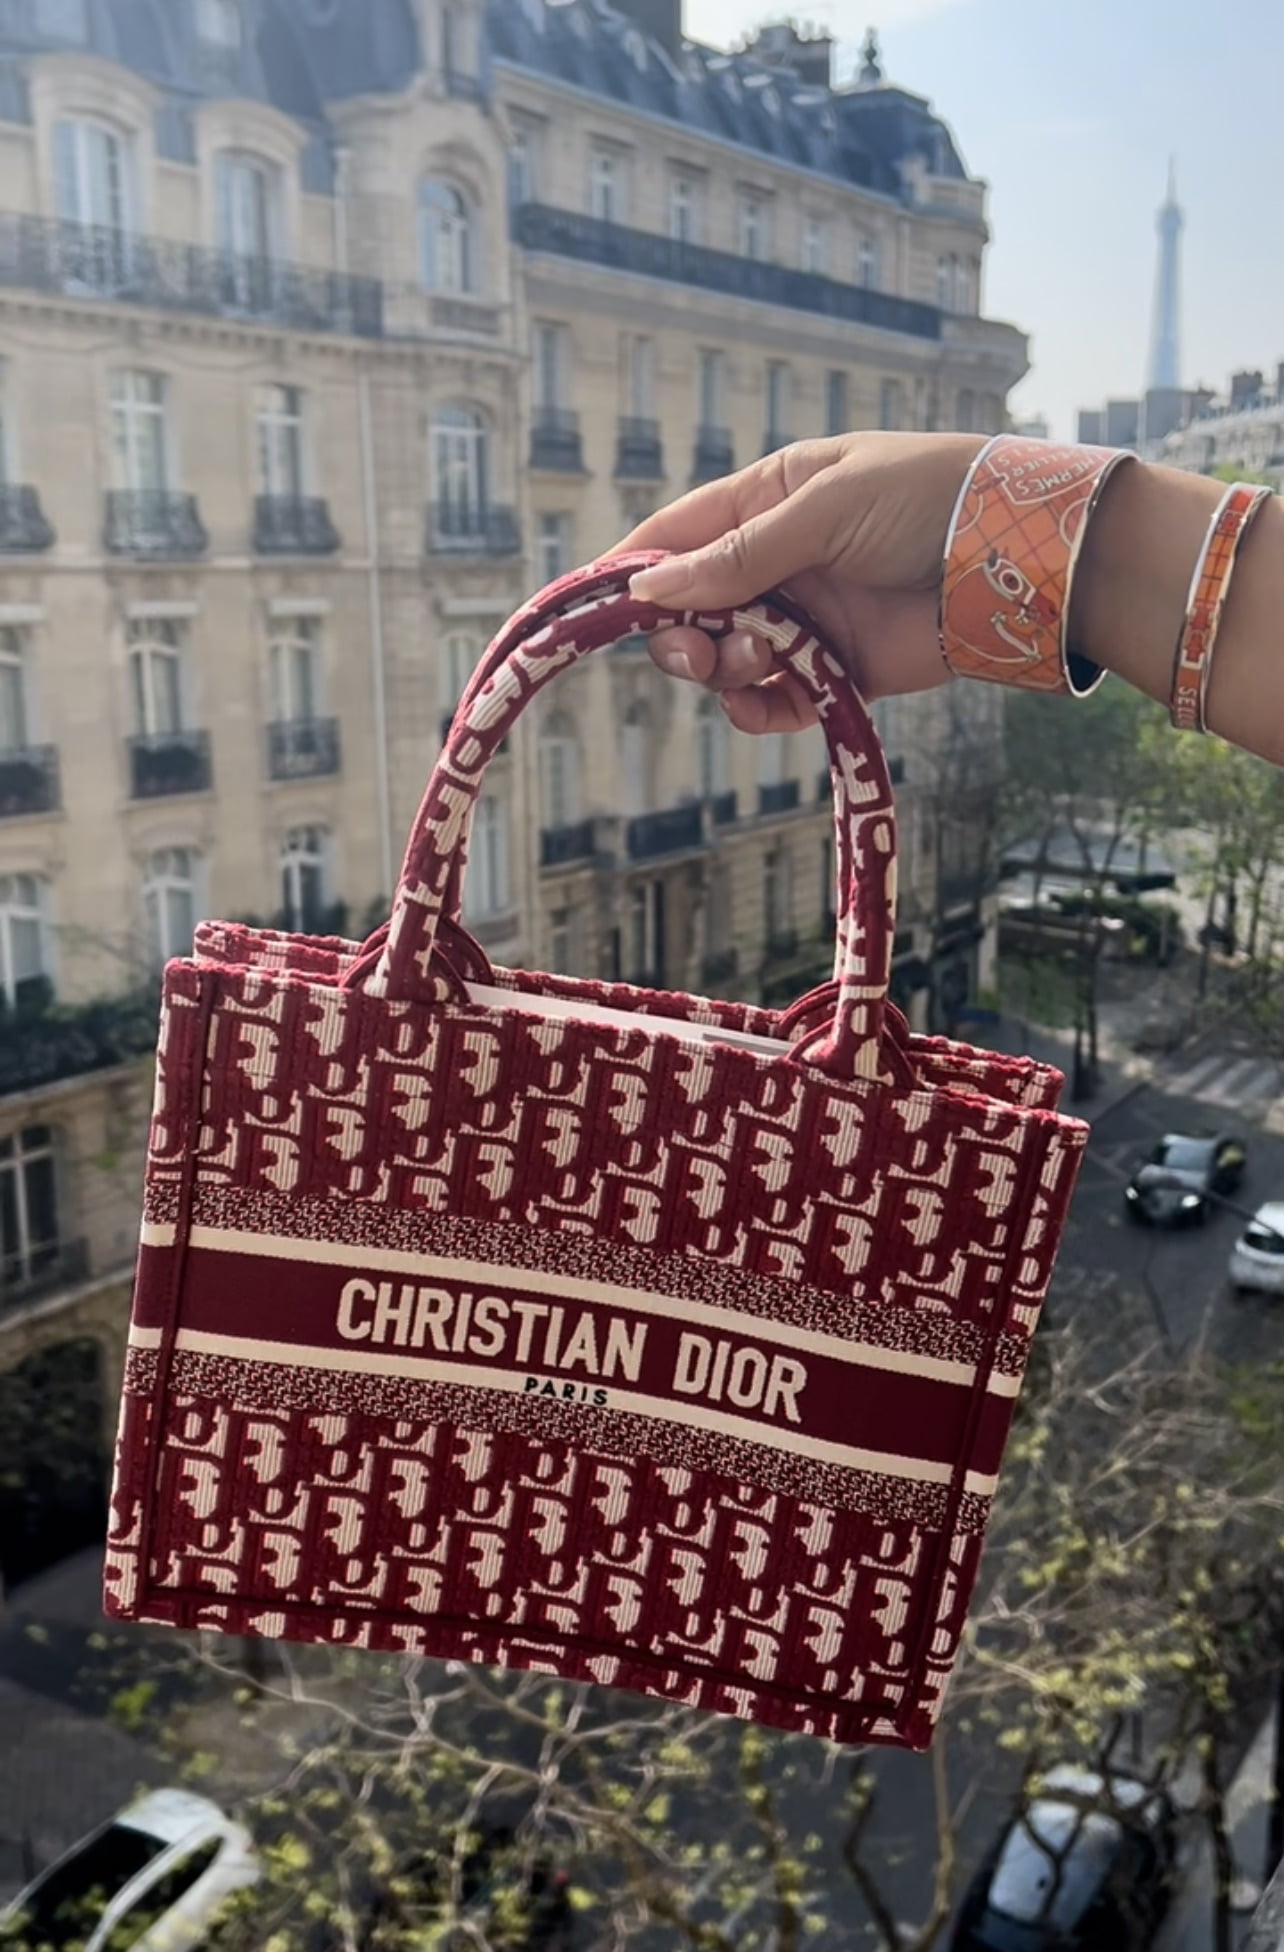 Dior Book Tote (pictures only)